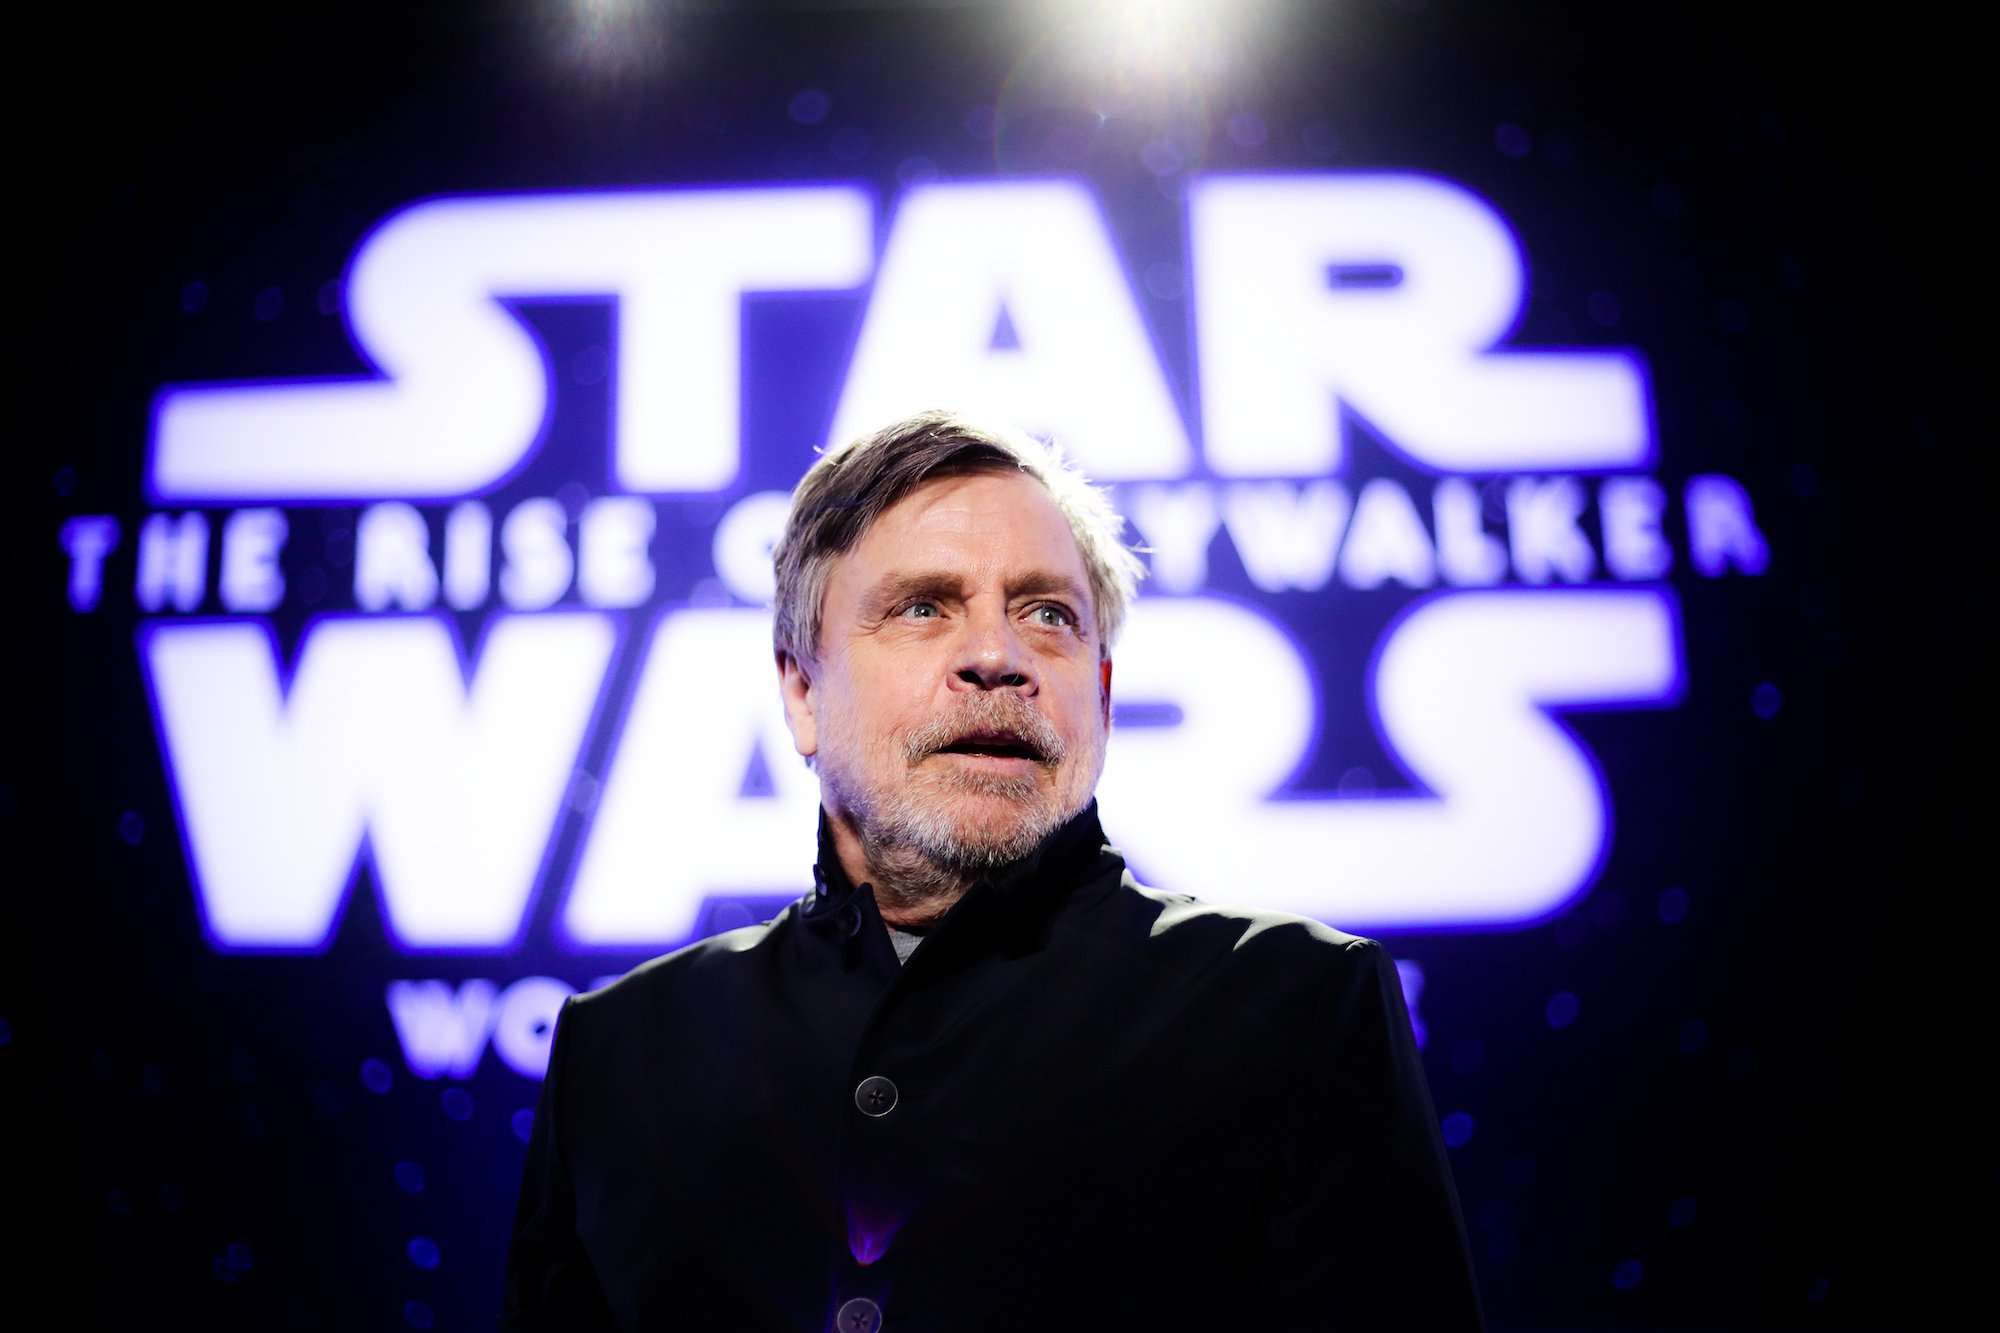 The Accident That Mark Hamill Thought Would Ruin His Career